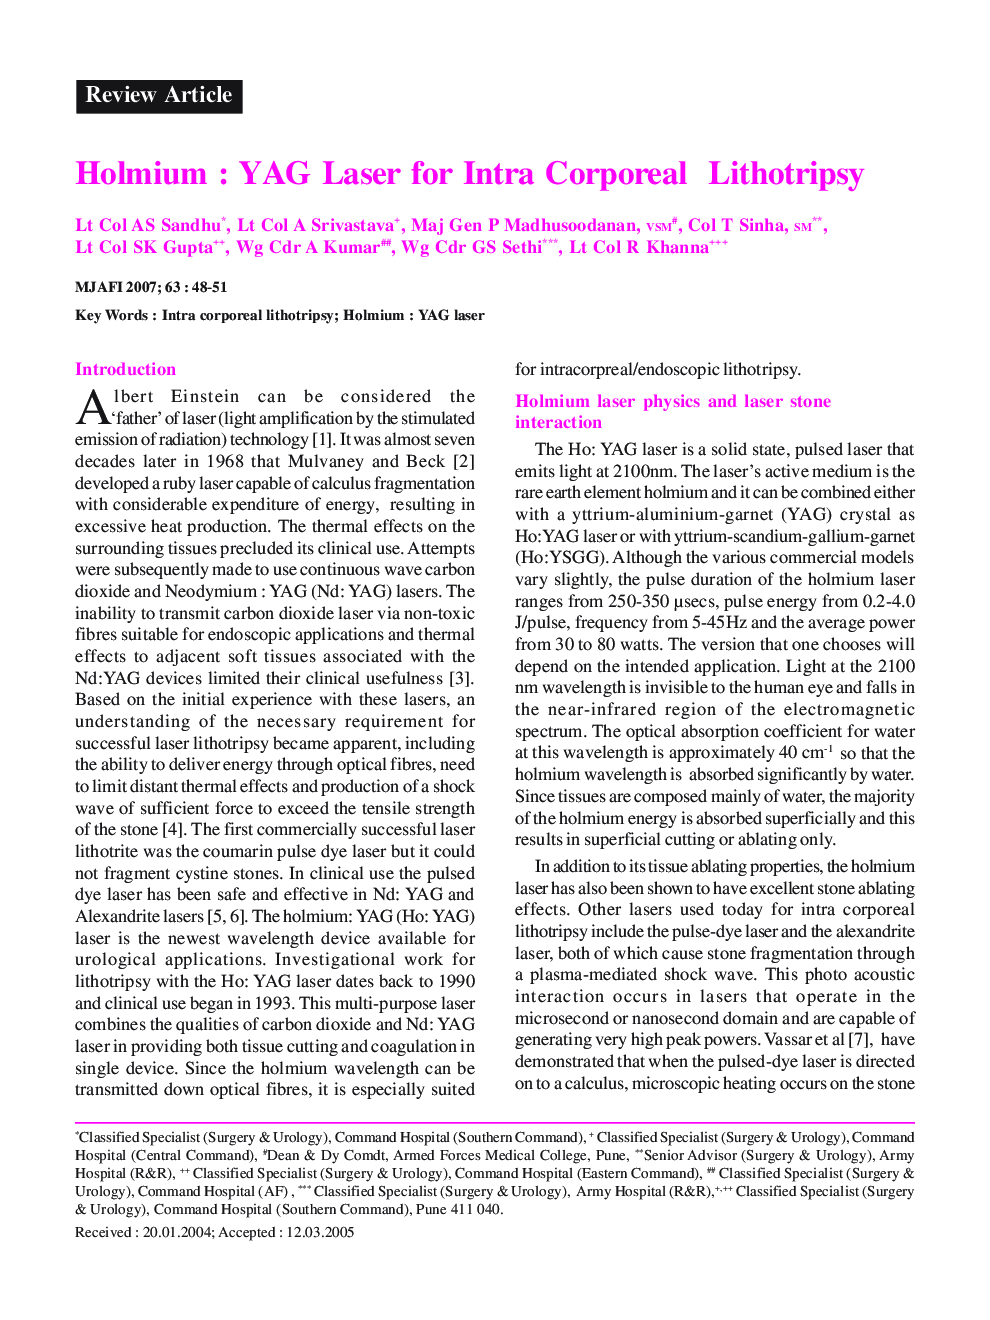 Holmium : YAG Laser for Intra Corporeal Lithotripsy